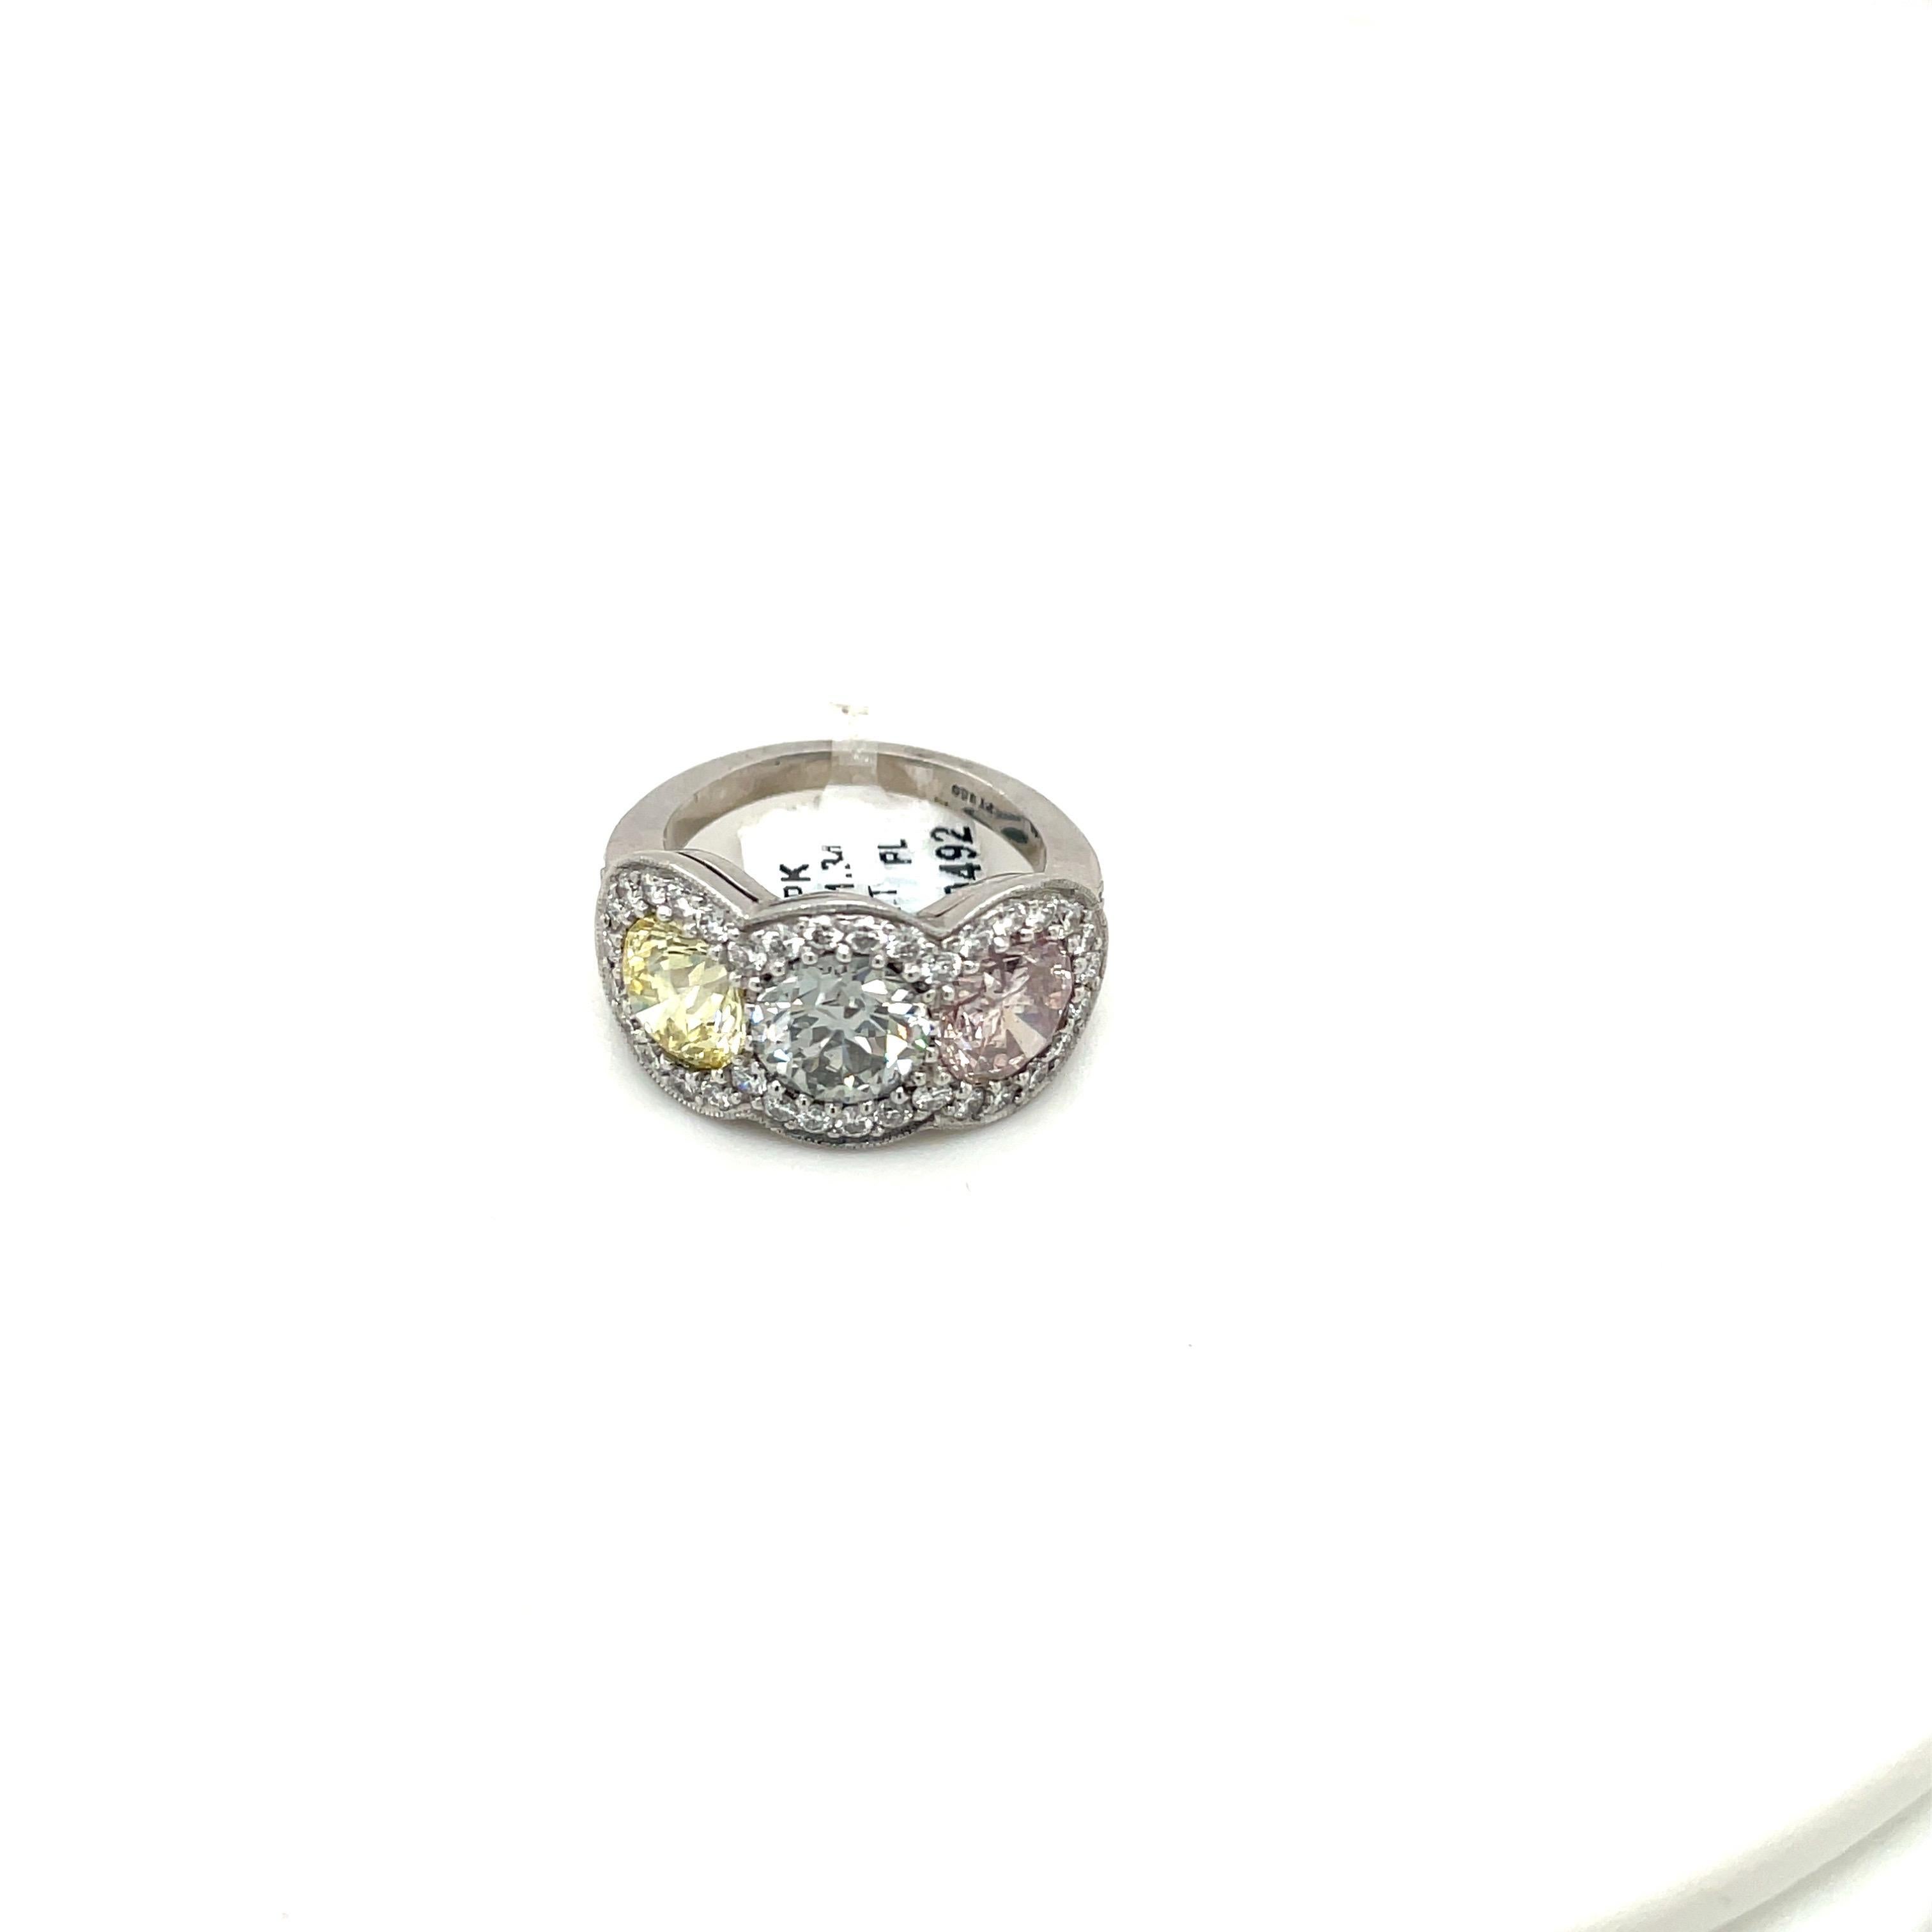 Cellini Plat Fancy Colored 1.43Ct Pink 1.34Ct Yellow 1.53Ct Grey Diamond Ring For Sale 3